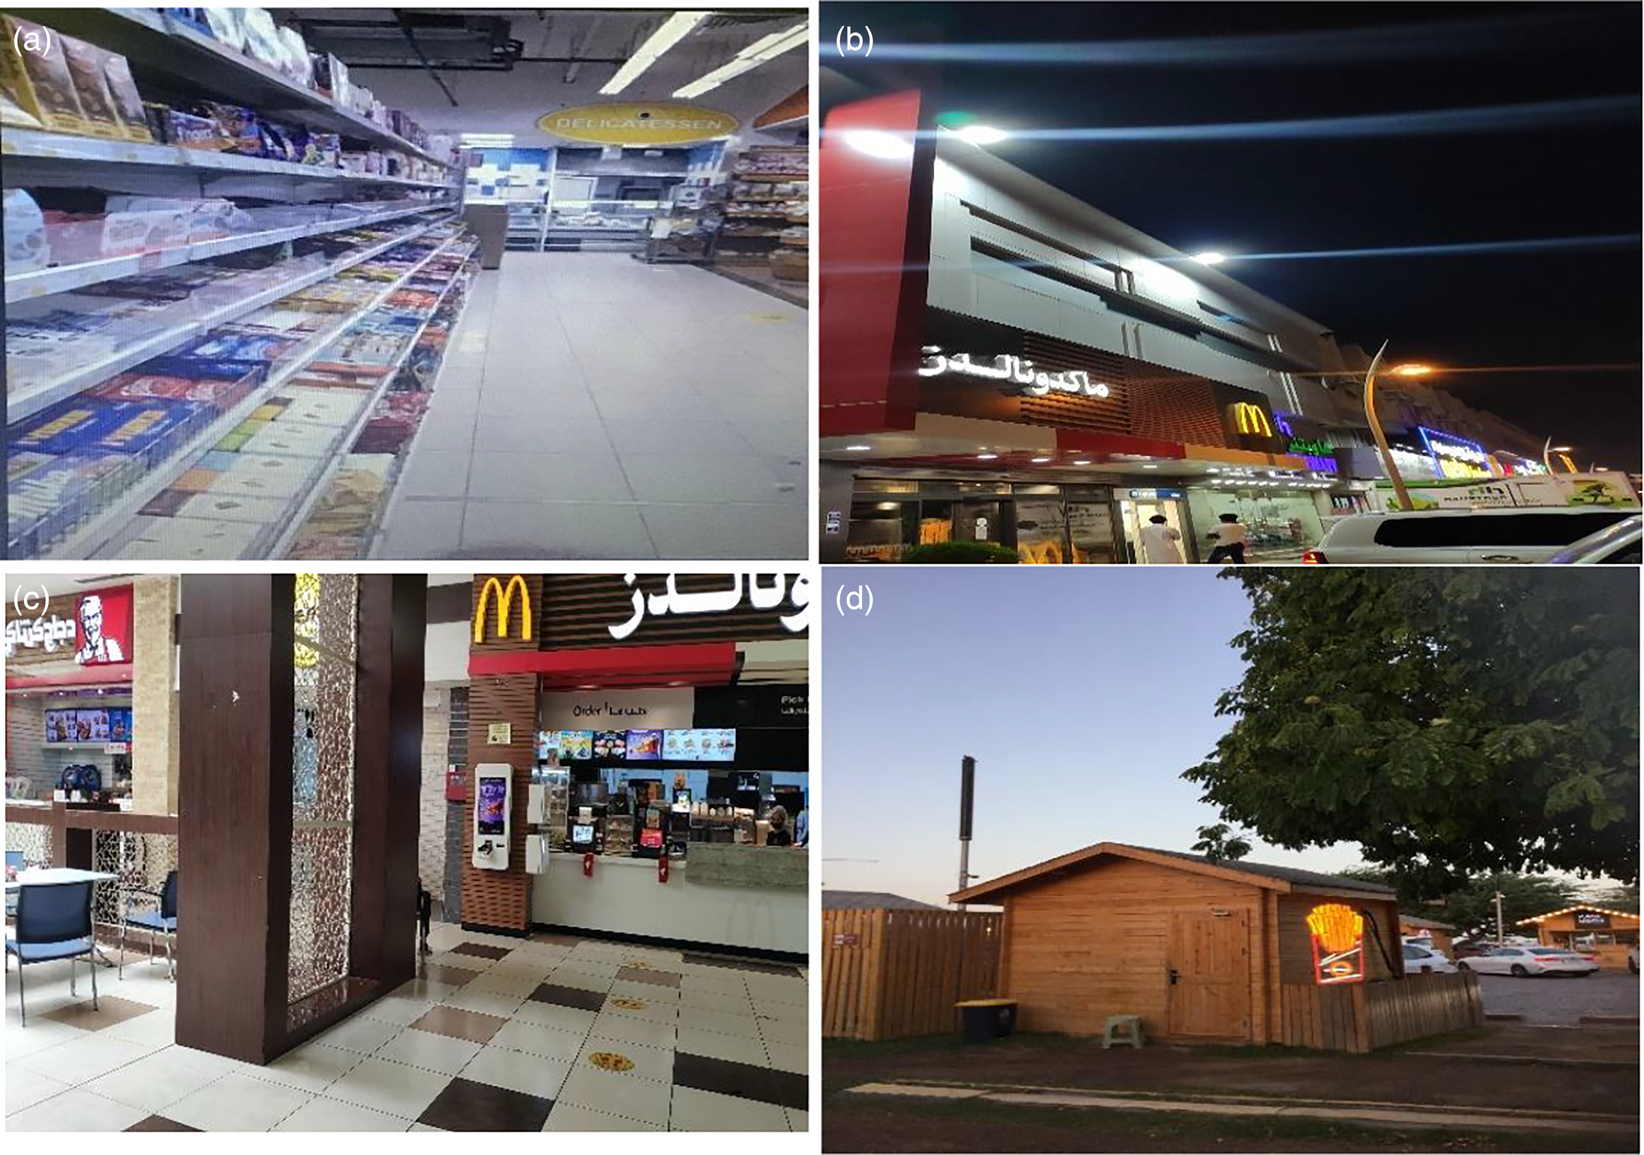 Undergraduate nursing and medical students’ perceptions of food security and access to healthy food in Qatar: a photovoice study | Journal of Nutritional